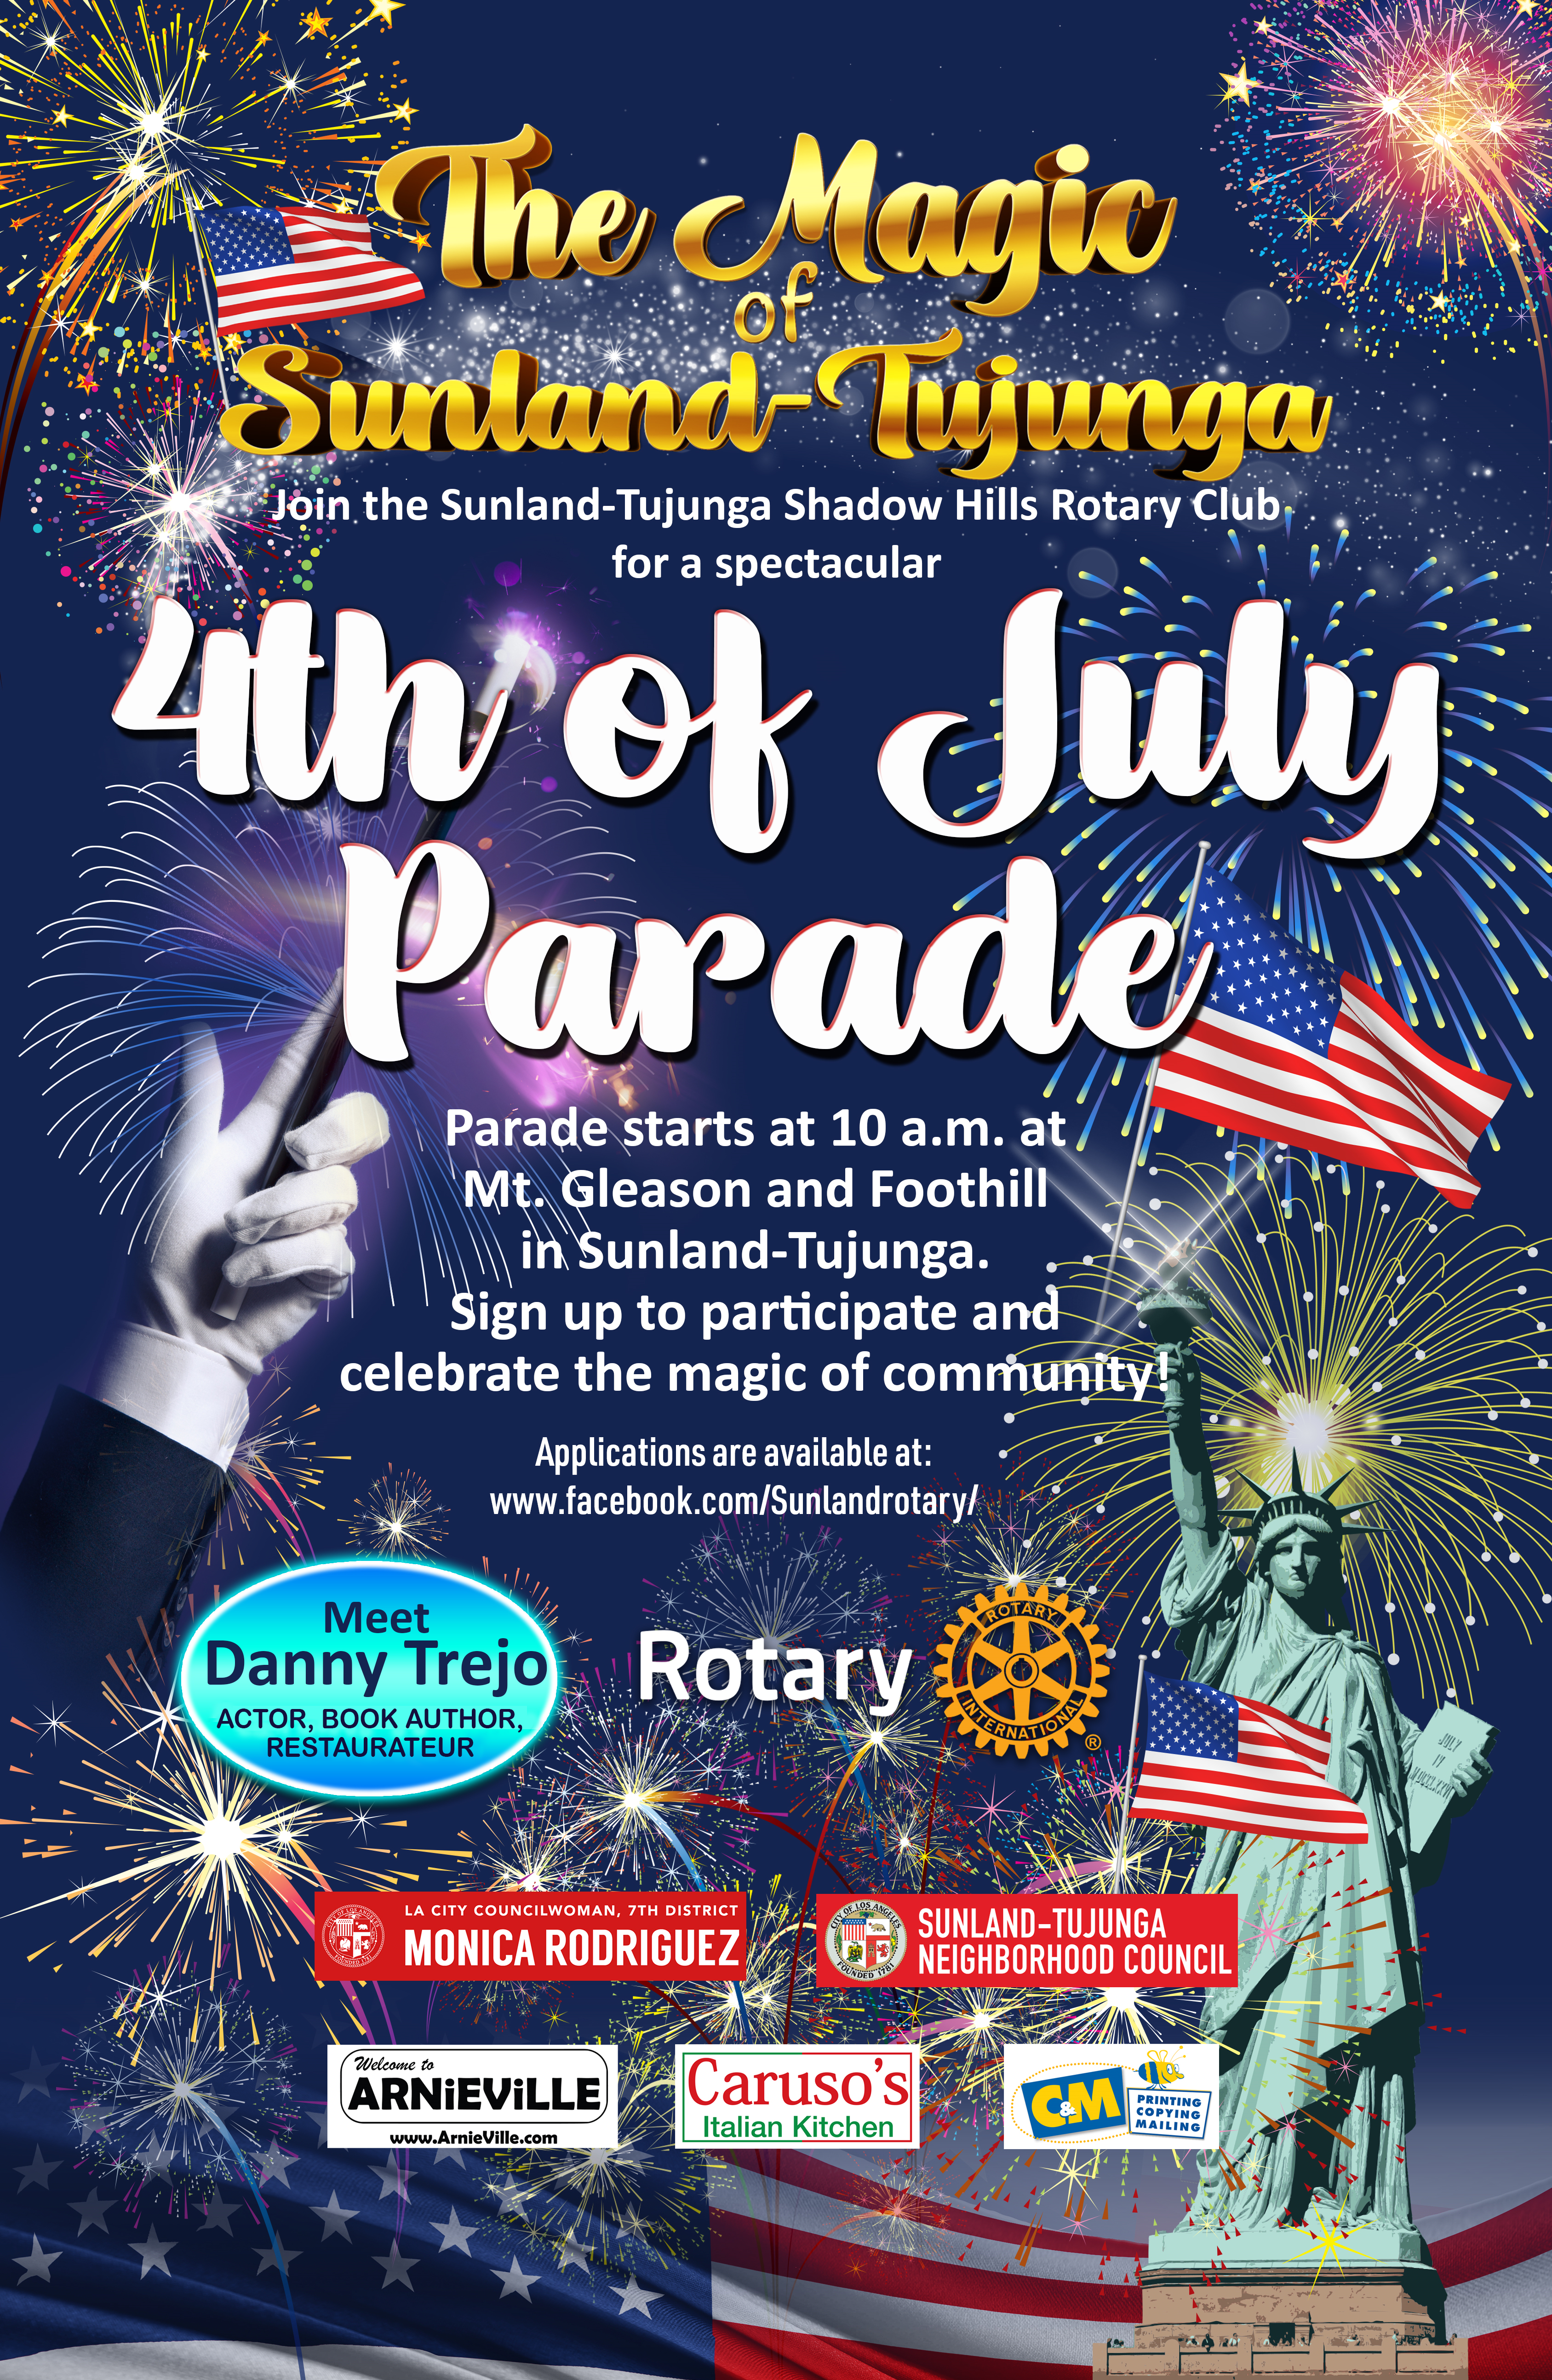 Sunland-Tujunga Shadow Hills Rotary Hosts Our 4th of July Parade!